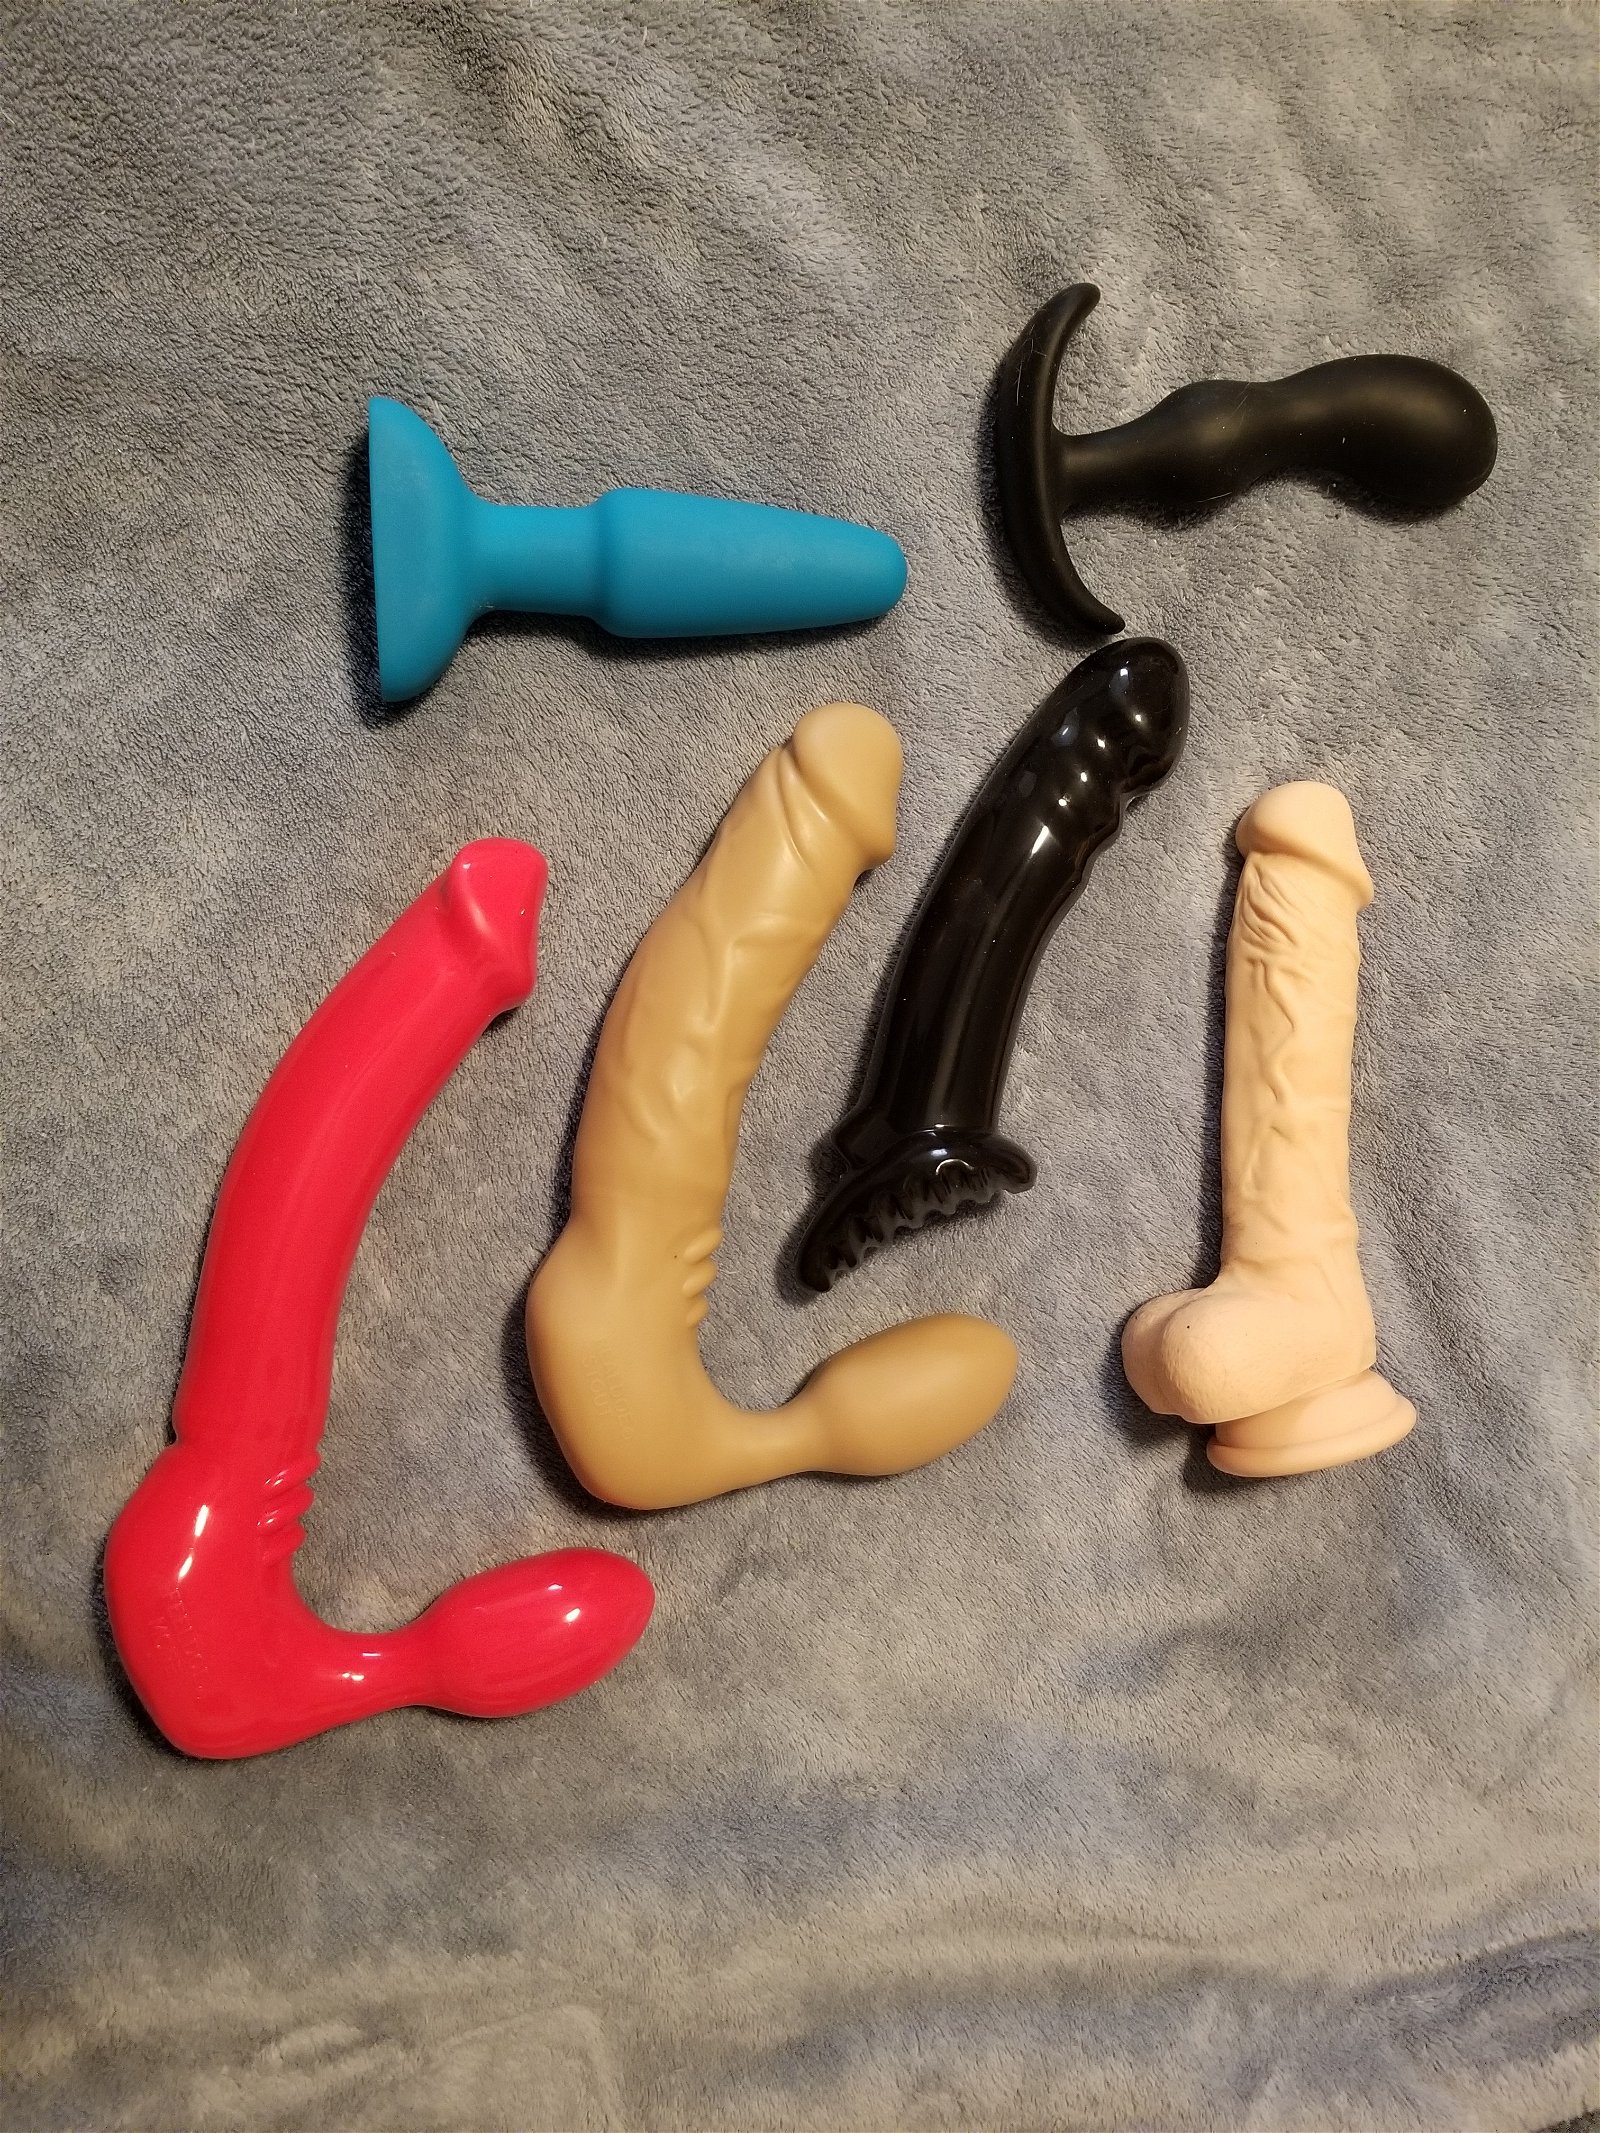 Watch the Photo by BiBottomHubby with the username @BiBottomHubby, posted on January 20, 2019 and the text says 'A few of the toys in my collection'